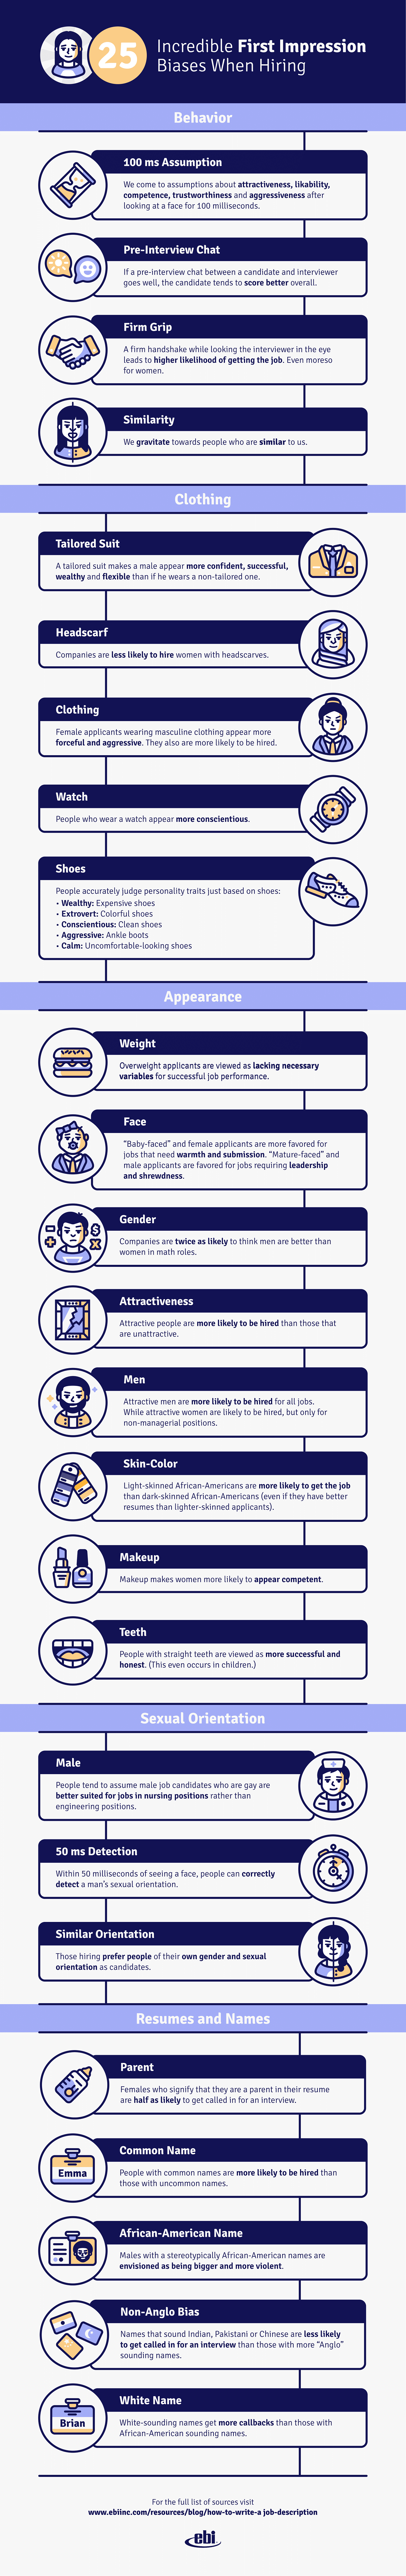 25 Incredible First Impression Biases When Hiring